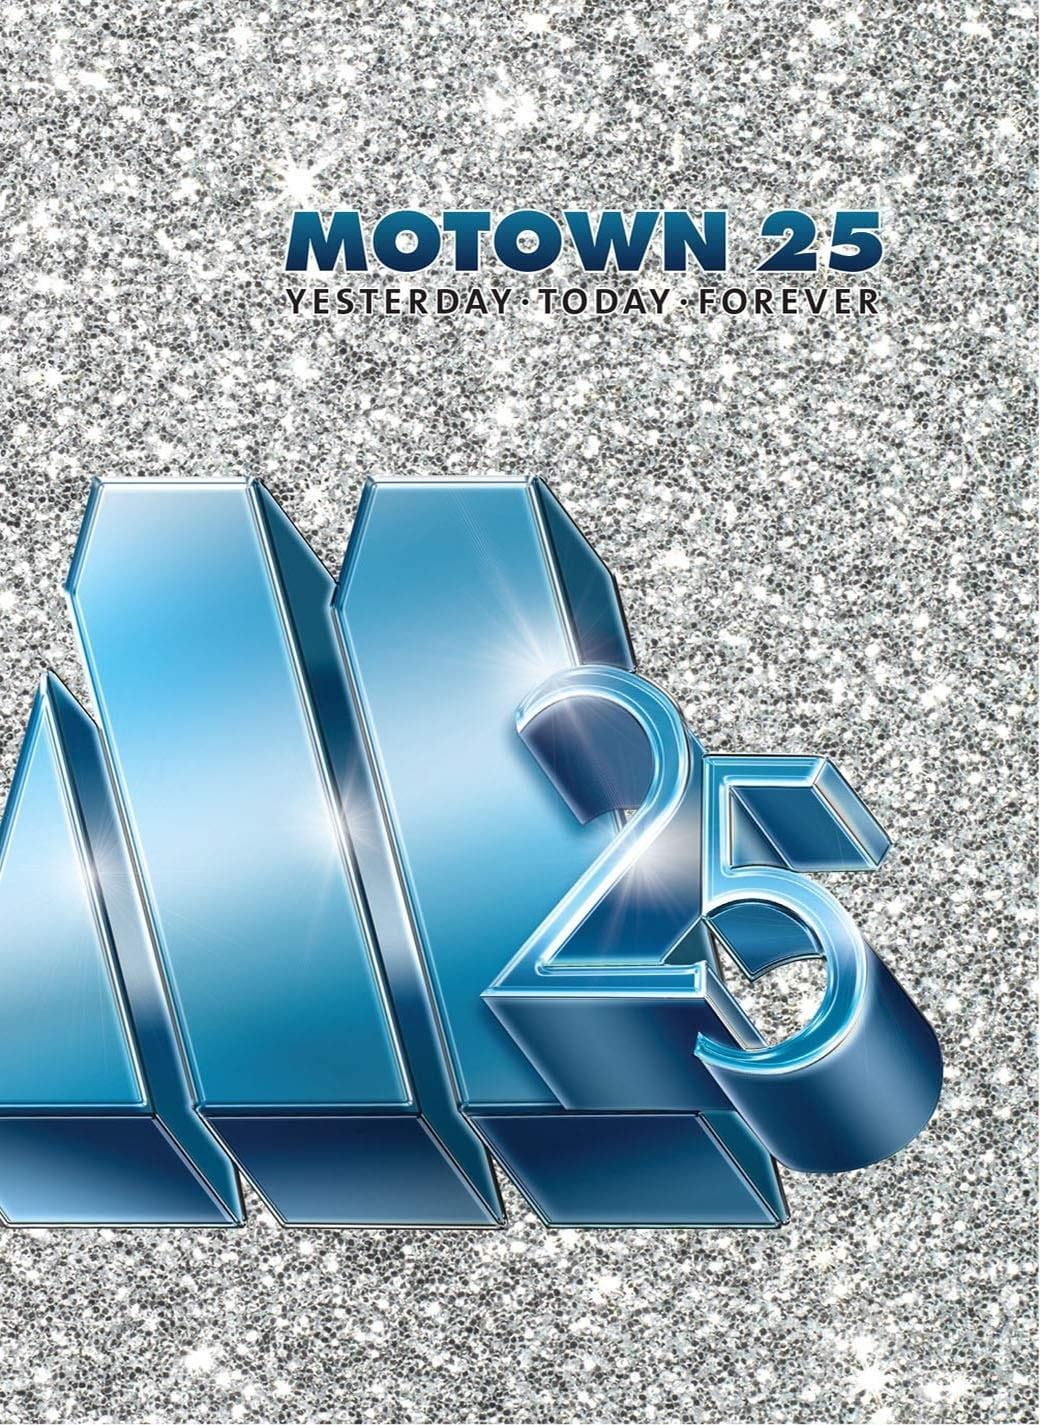 Motown 25: Yesterday, Today, Forever poster